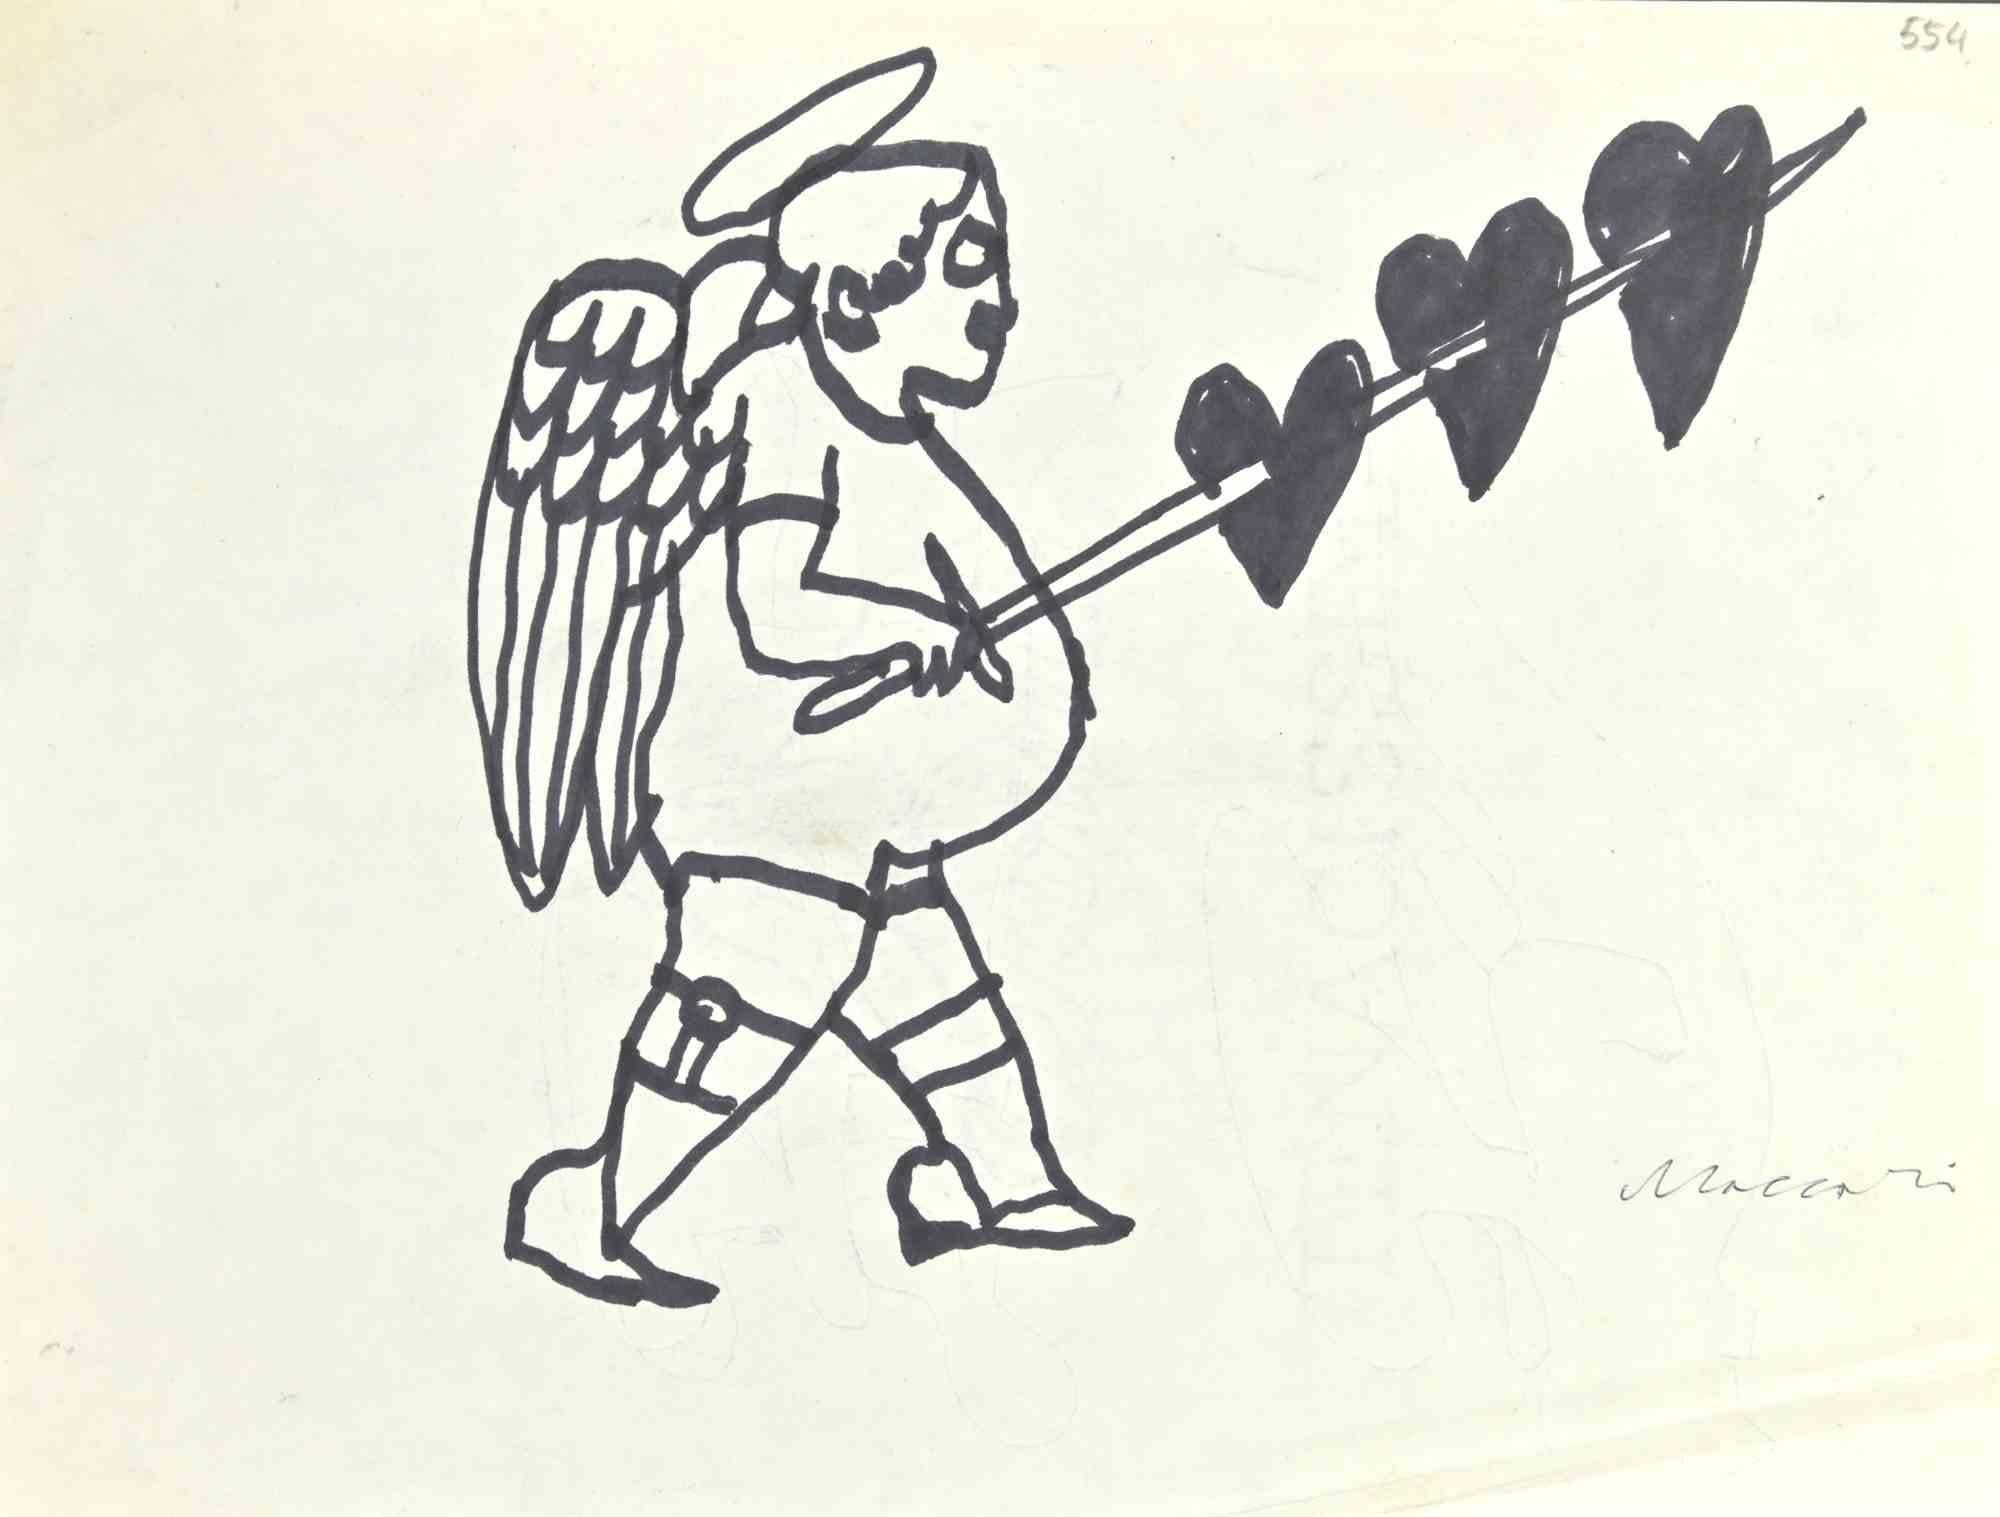 Angel of Hearts is a Watercolor Drawing realized by Mino Maccari  (1924-1989) in the 1960s.

Hand-signed on the lower.

Good condition, with slight folding on the lower right.

Mino Maccari (Siena, 1924-Rome, June 16, 1989) was an Italian writer,